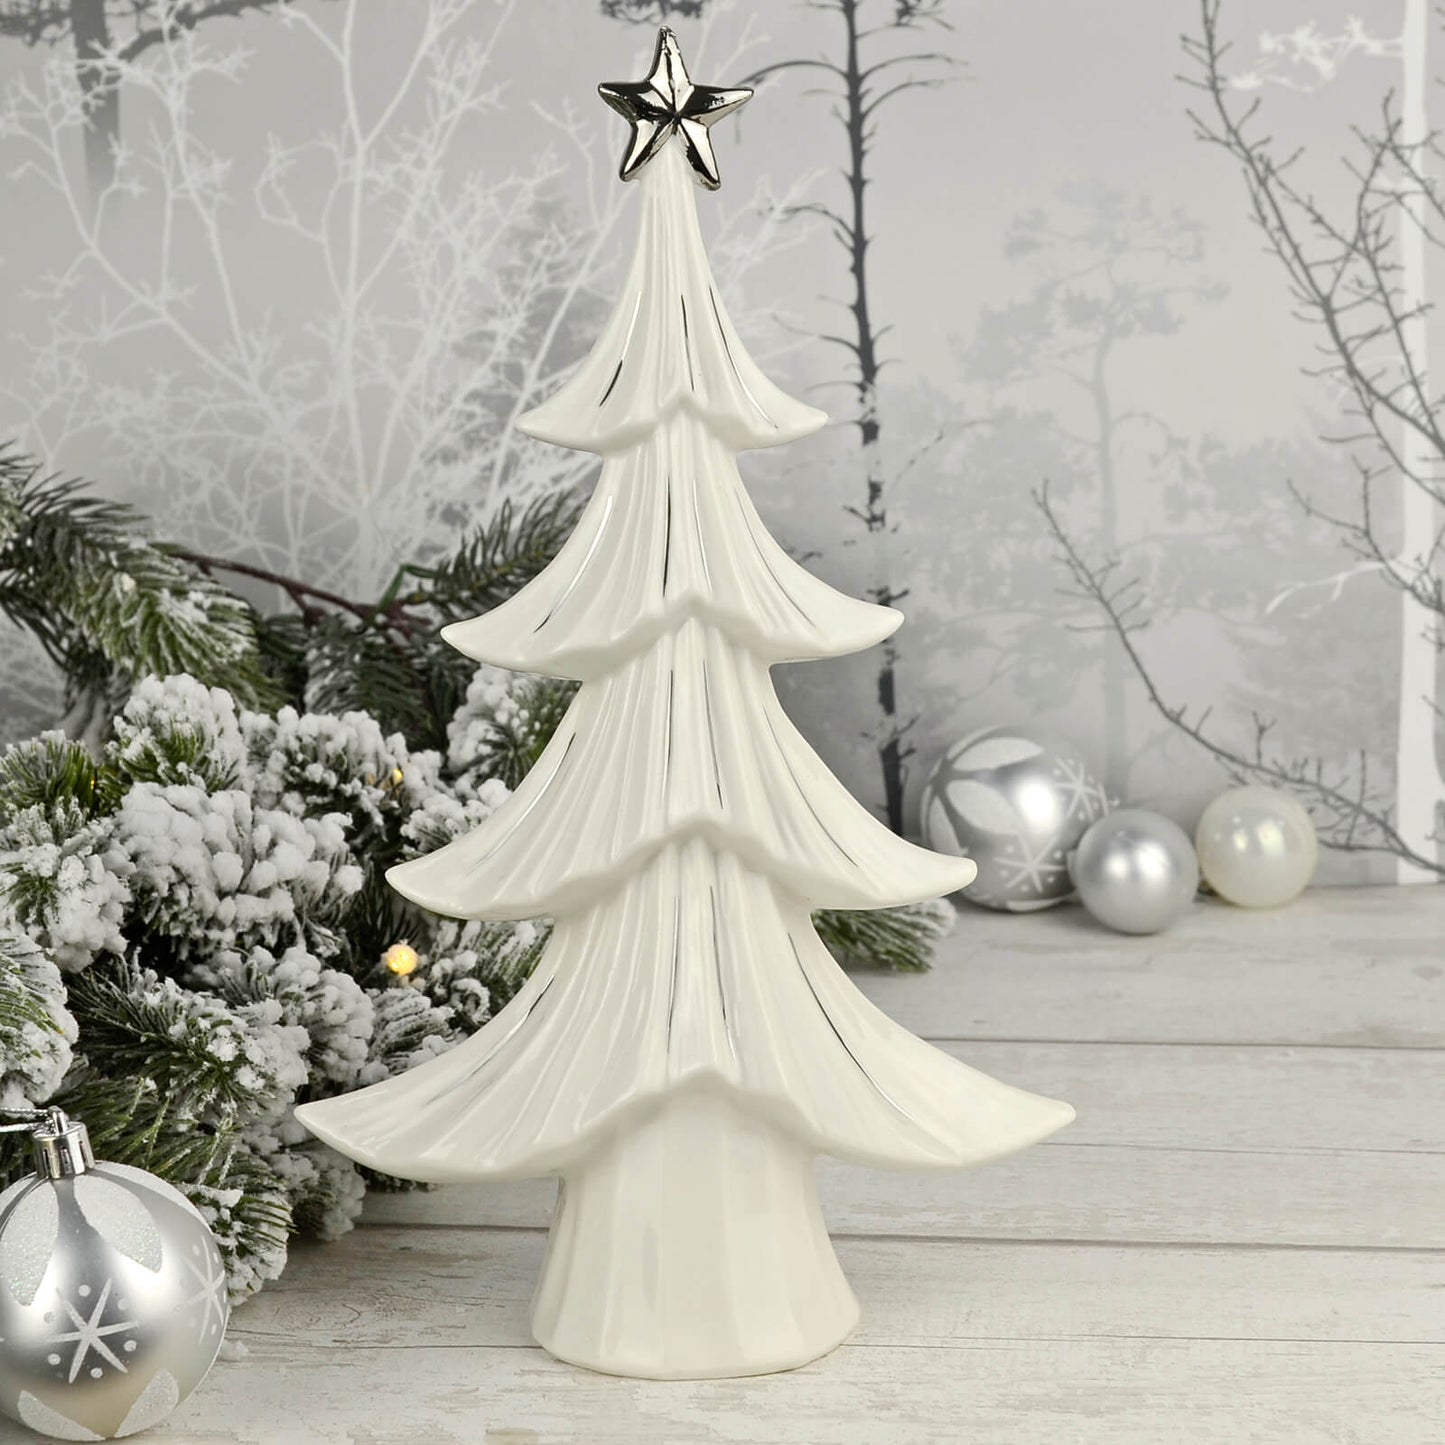 Christmas tree shaped white ceramic ornament with silver star and details on a wooden table with pine garland, silver baubles and LED lights